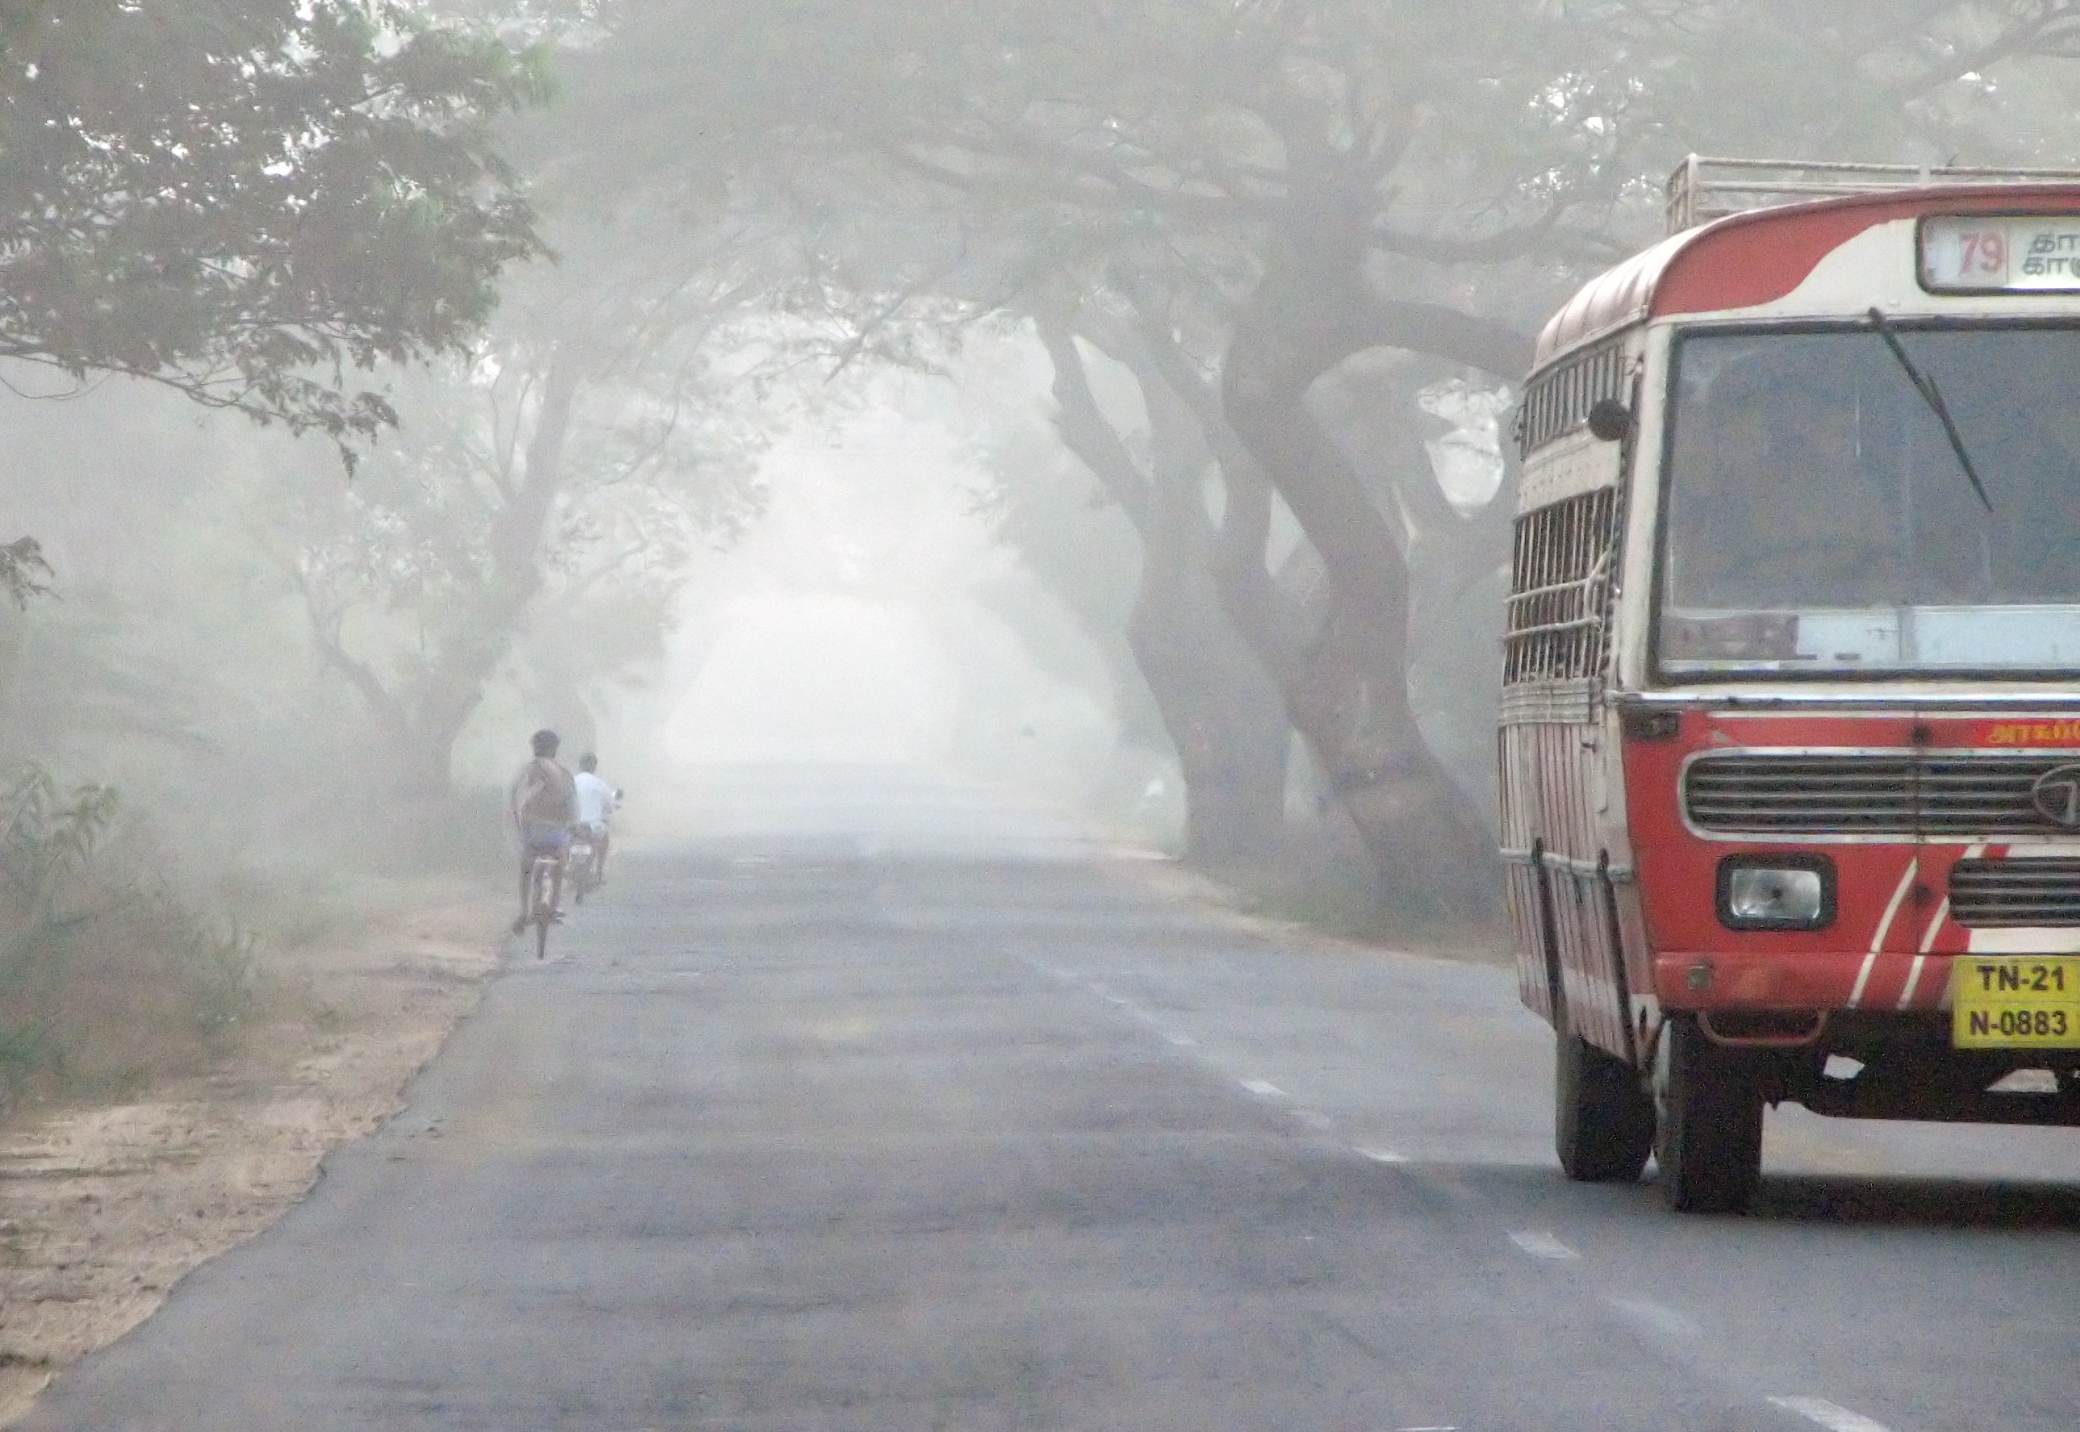 File:Early morning travel in a Tamilnadu road.jpeg - Wikimedia Commons